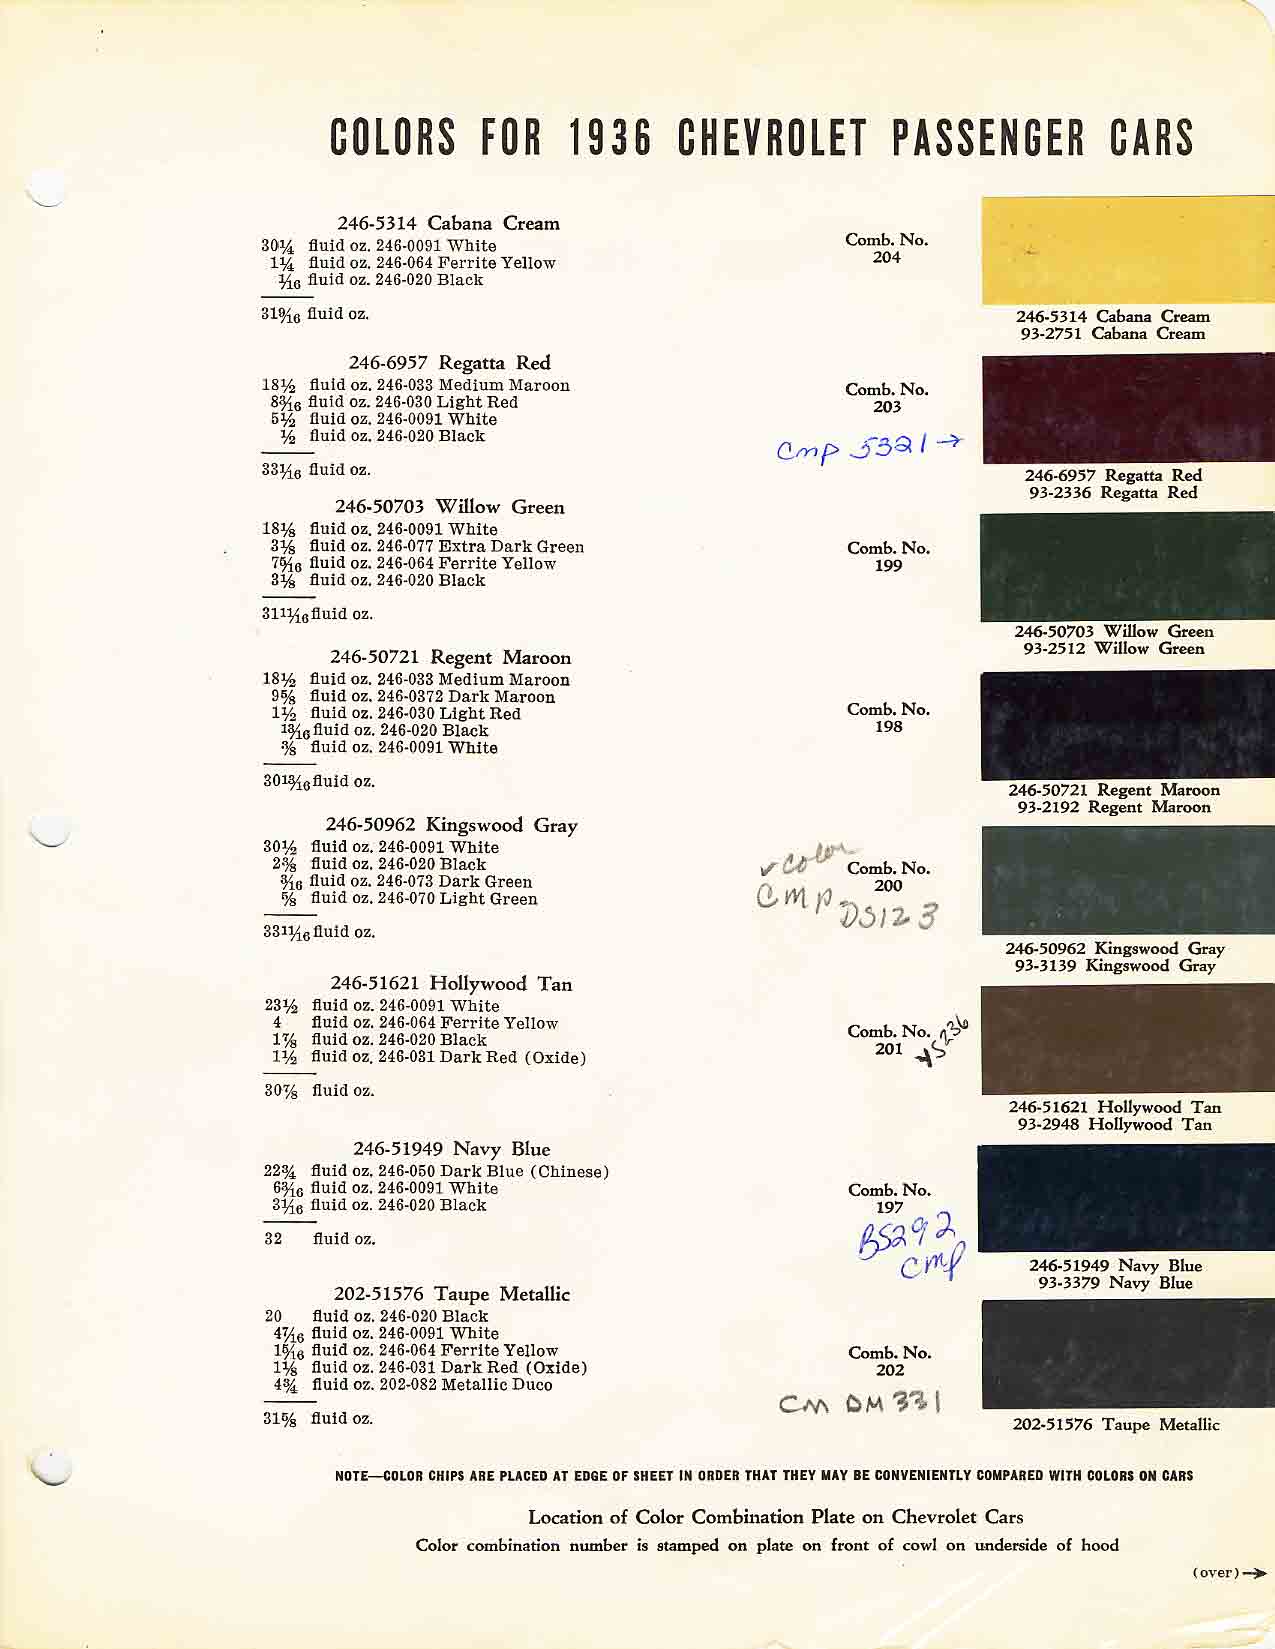 Exterior Color and Codes used on 1936 Chevrolet Vehicles